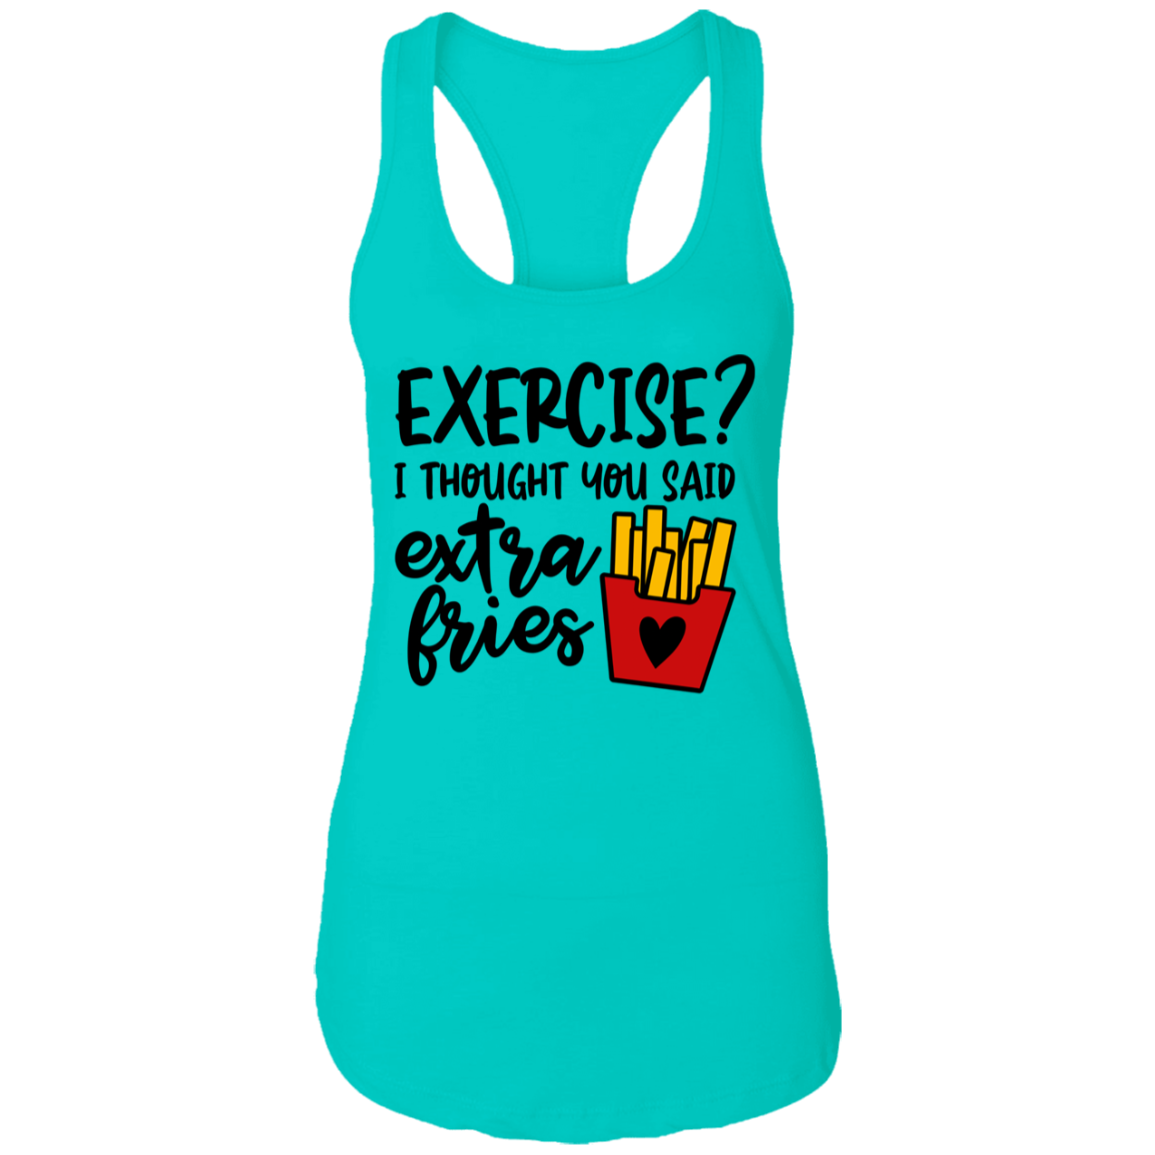 Exercise? I Thought You Said Fries Racerback Tank